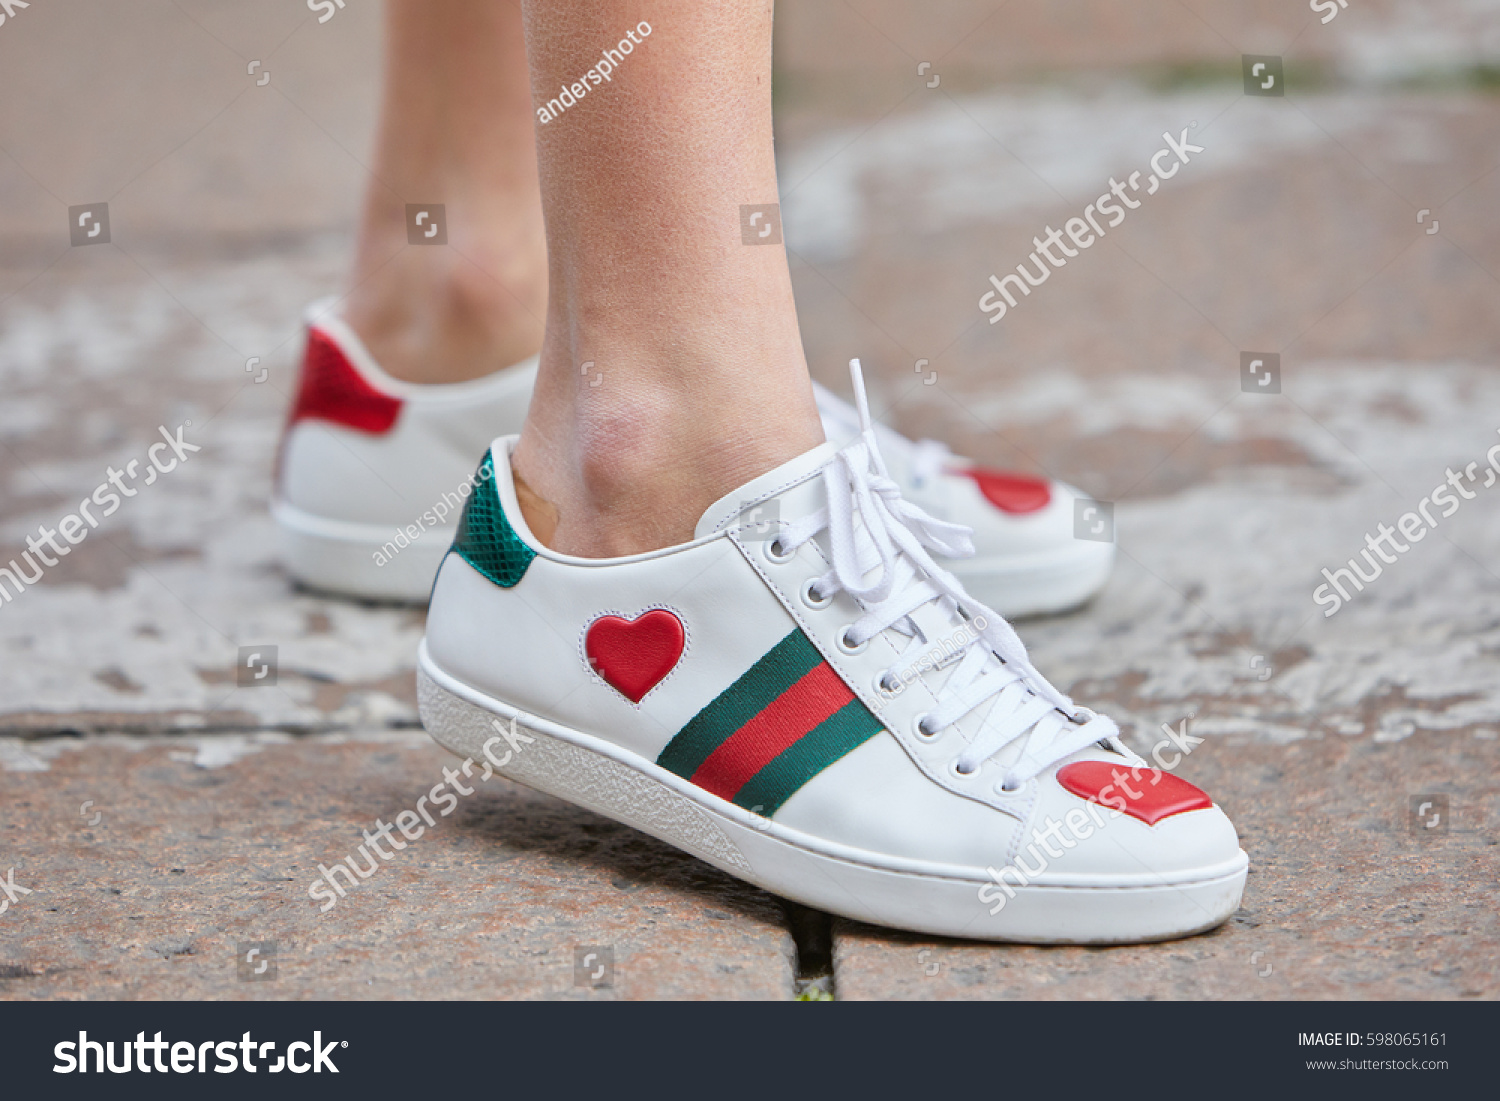 gucci shoes with red heart